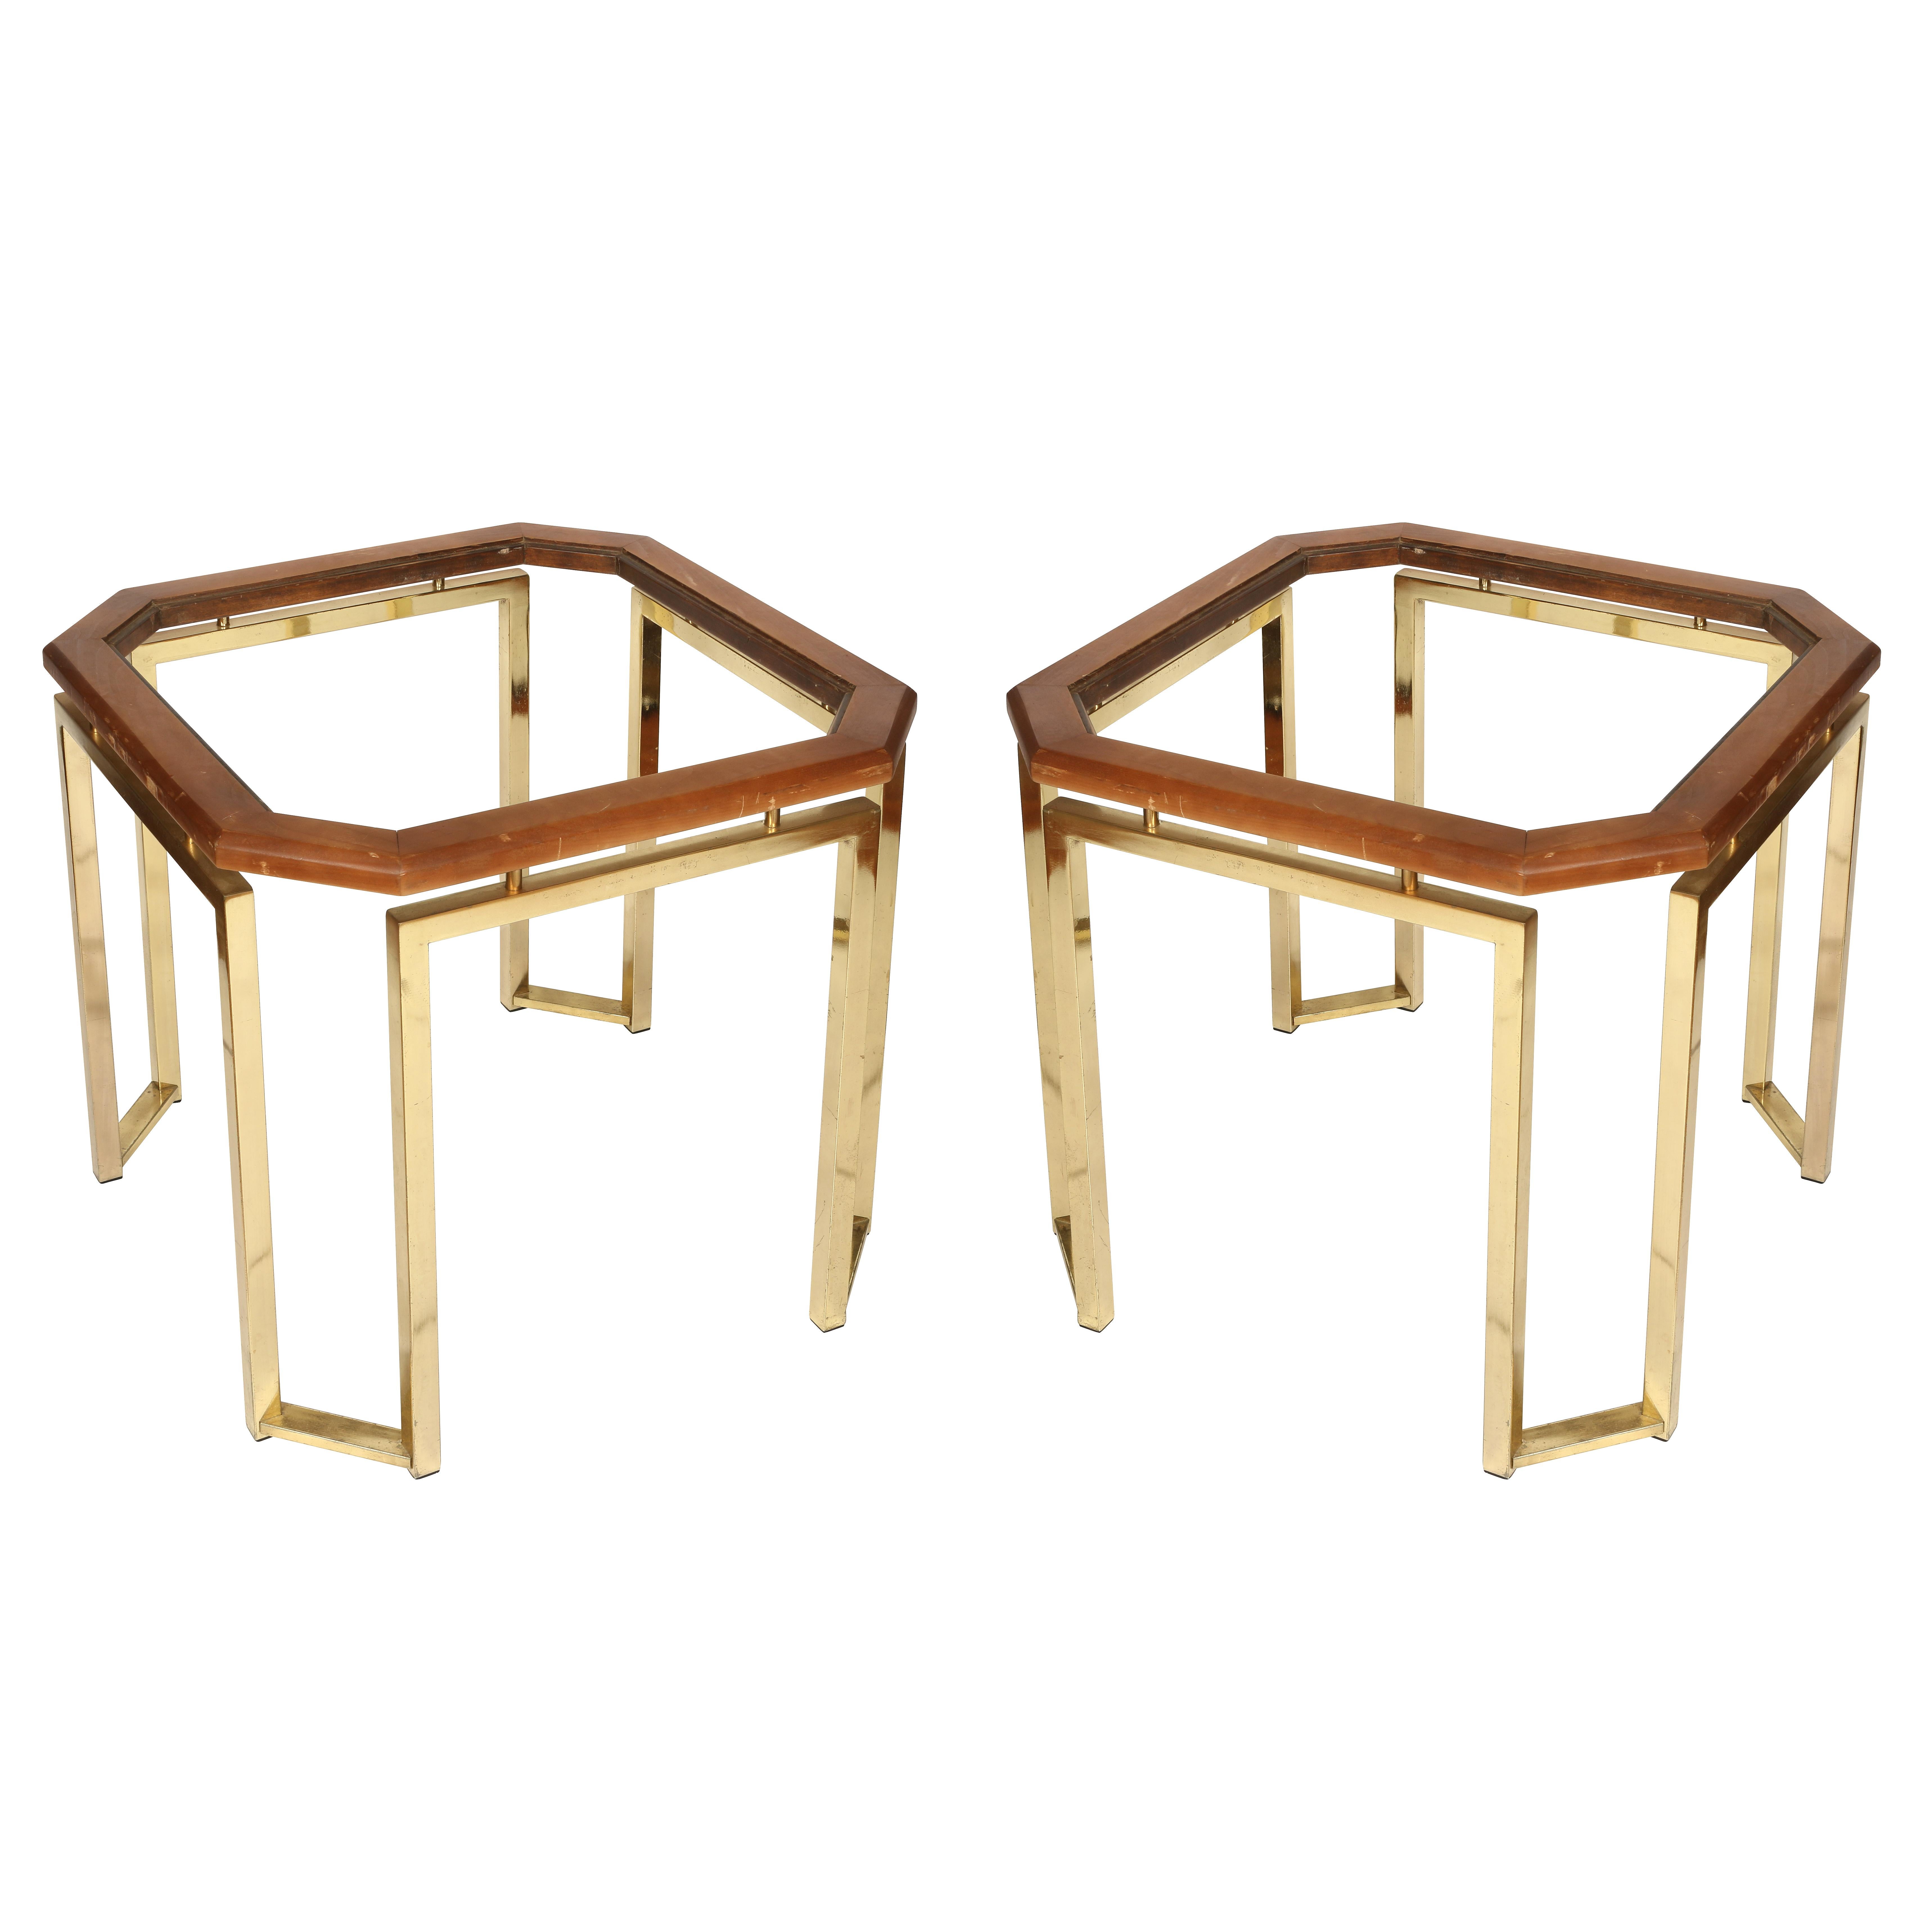 20th Century Pair of James Mont Style Brass and Wood Side Tables